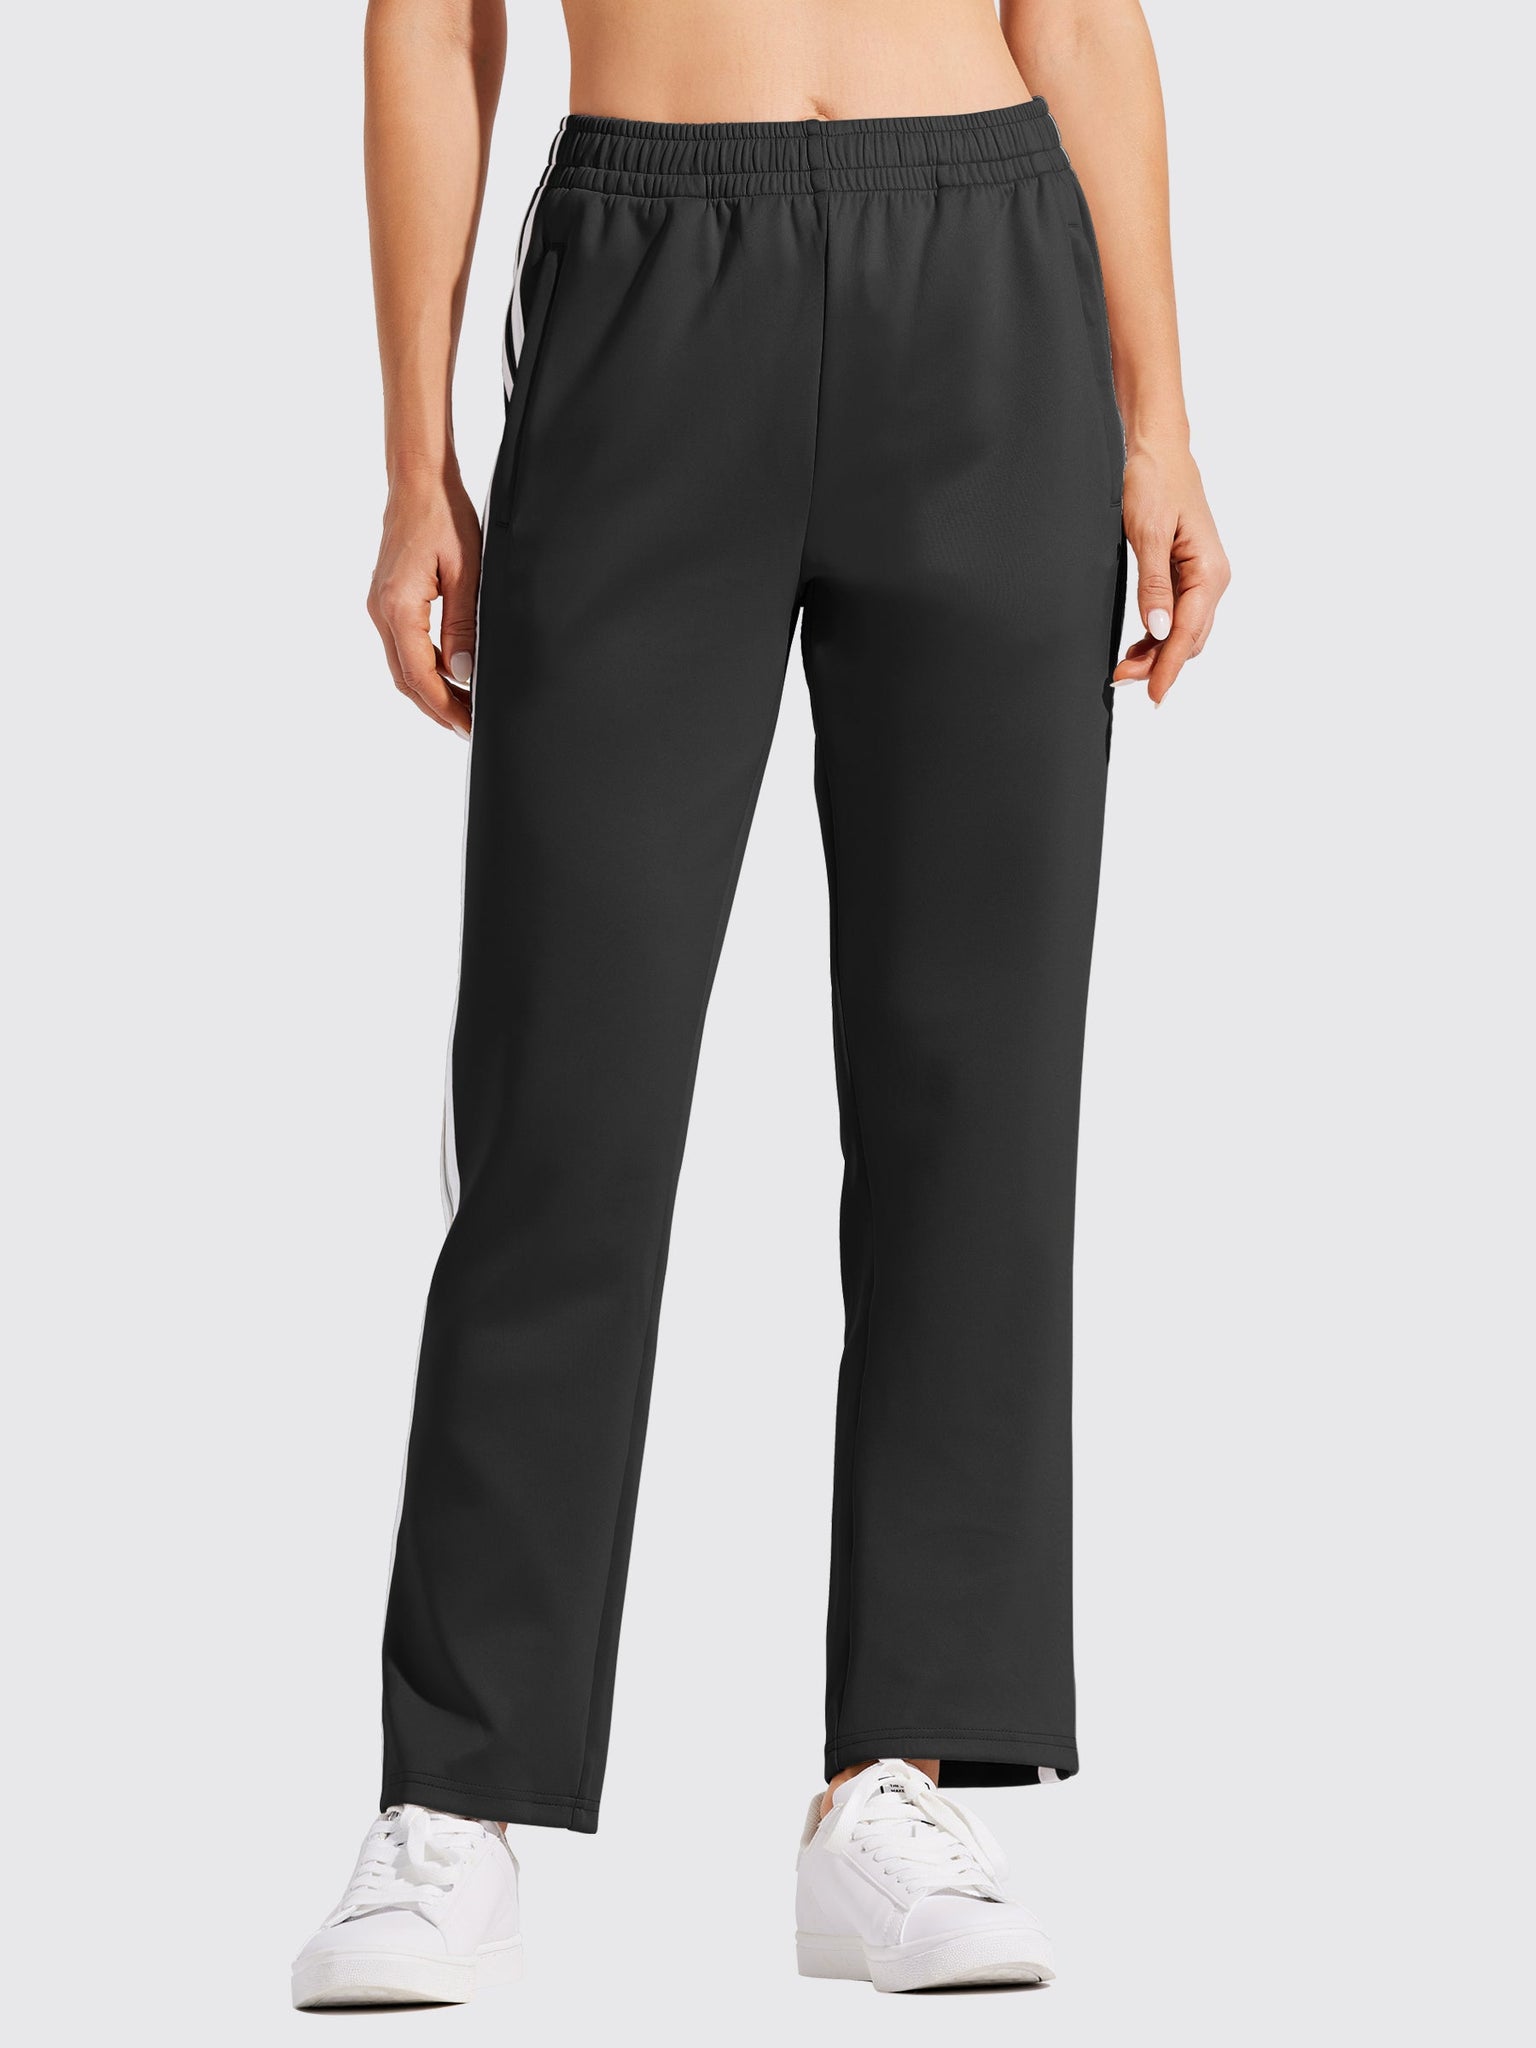 Willit Women's Golf Travel Pants Lounge Sweatpants 7/8 Athletic Pants Quick  Dry On The Fly Pants Black XS, Pants -  Canada